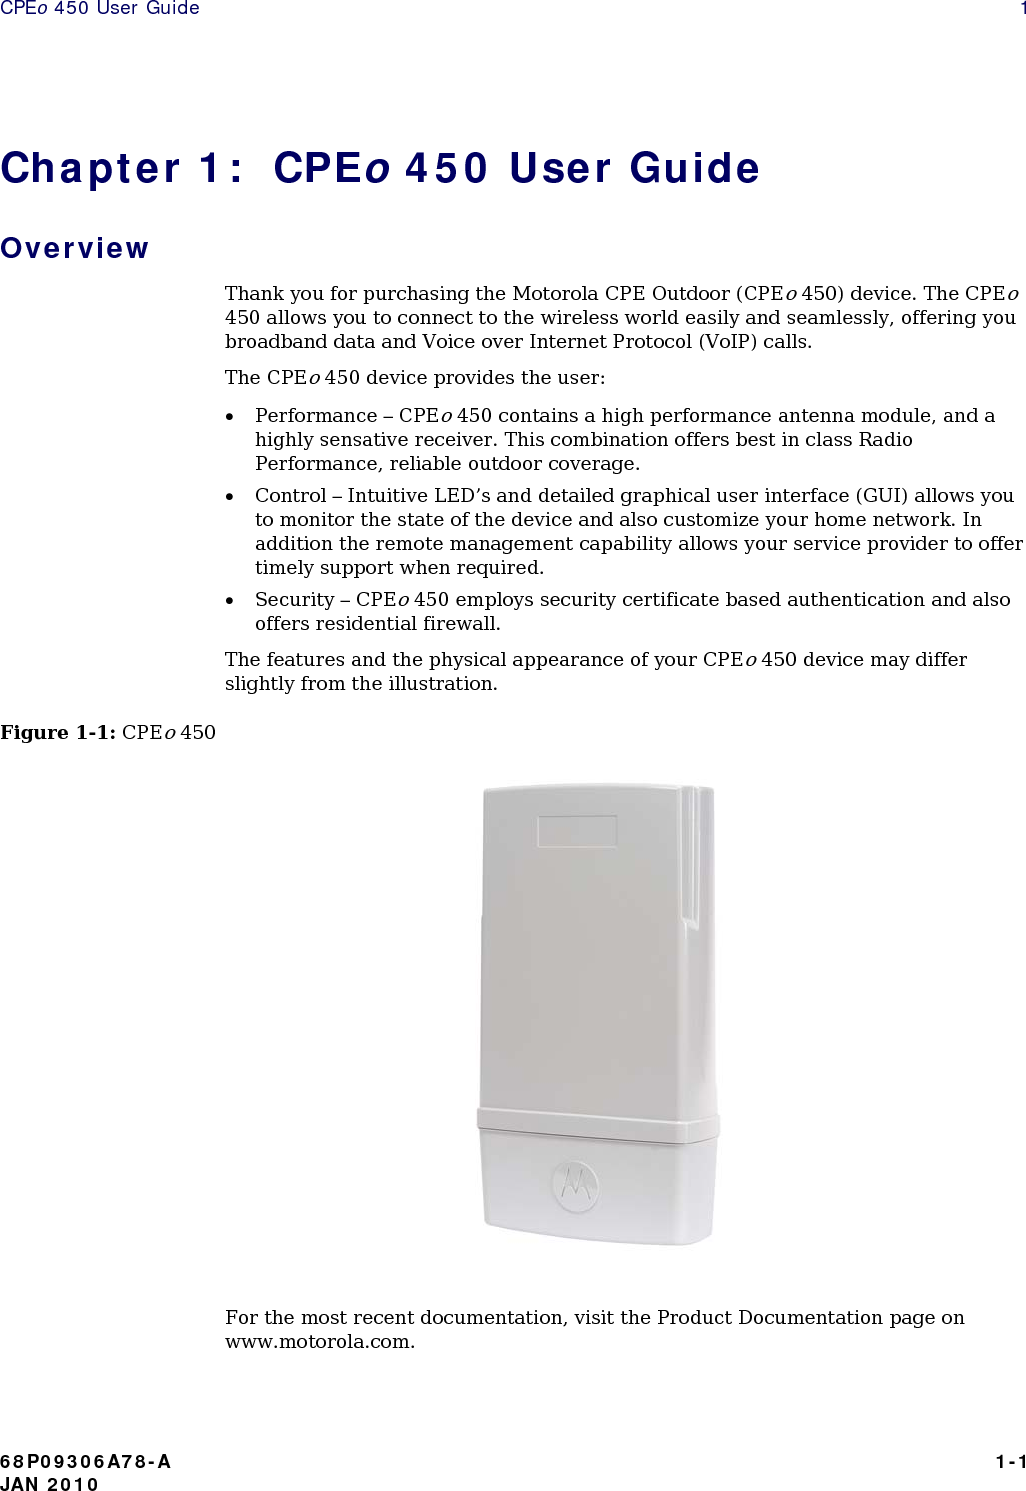 CPEo 450 User Guide    1 Chapter 1:  CPEo 450 User Guide Overview Thank you for purchasing the Motorola CPE Outdoor (CPEo 450) device. The CPEo 450 allows you to connect to the wireless world easily and seamlessly, offering you broadband data and Voice over Internet Protocol (VoIP) calls.  The CPEo 450 device provides the user: • Performance – CPEo 450 contains a high performance antenna module, and a highly sensative receiver. This combination offers best in class Radio Performance, reliable outdoor coverage. • Control – Intuitive LED’s and detailed graphical user interface (GUI) allows you to monitor the state of the device and also customize your home network. In addition the remote management capability allows your service provider to offer timely support when required. • Security – CPEo 450 employs security certificate based authentication and also offers residential firewall.  The features and the physical appearance of your CPEo 450 device may differ slightly from the illustration.  Figure 1-1: CPEo 450      For the most recent documentation, visit the Product Documentation page on www.motorola.com. 68P09306A78-A   1-1 JAN 2010 